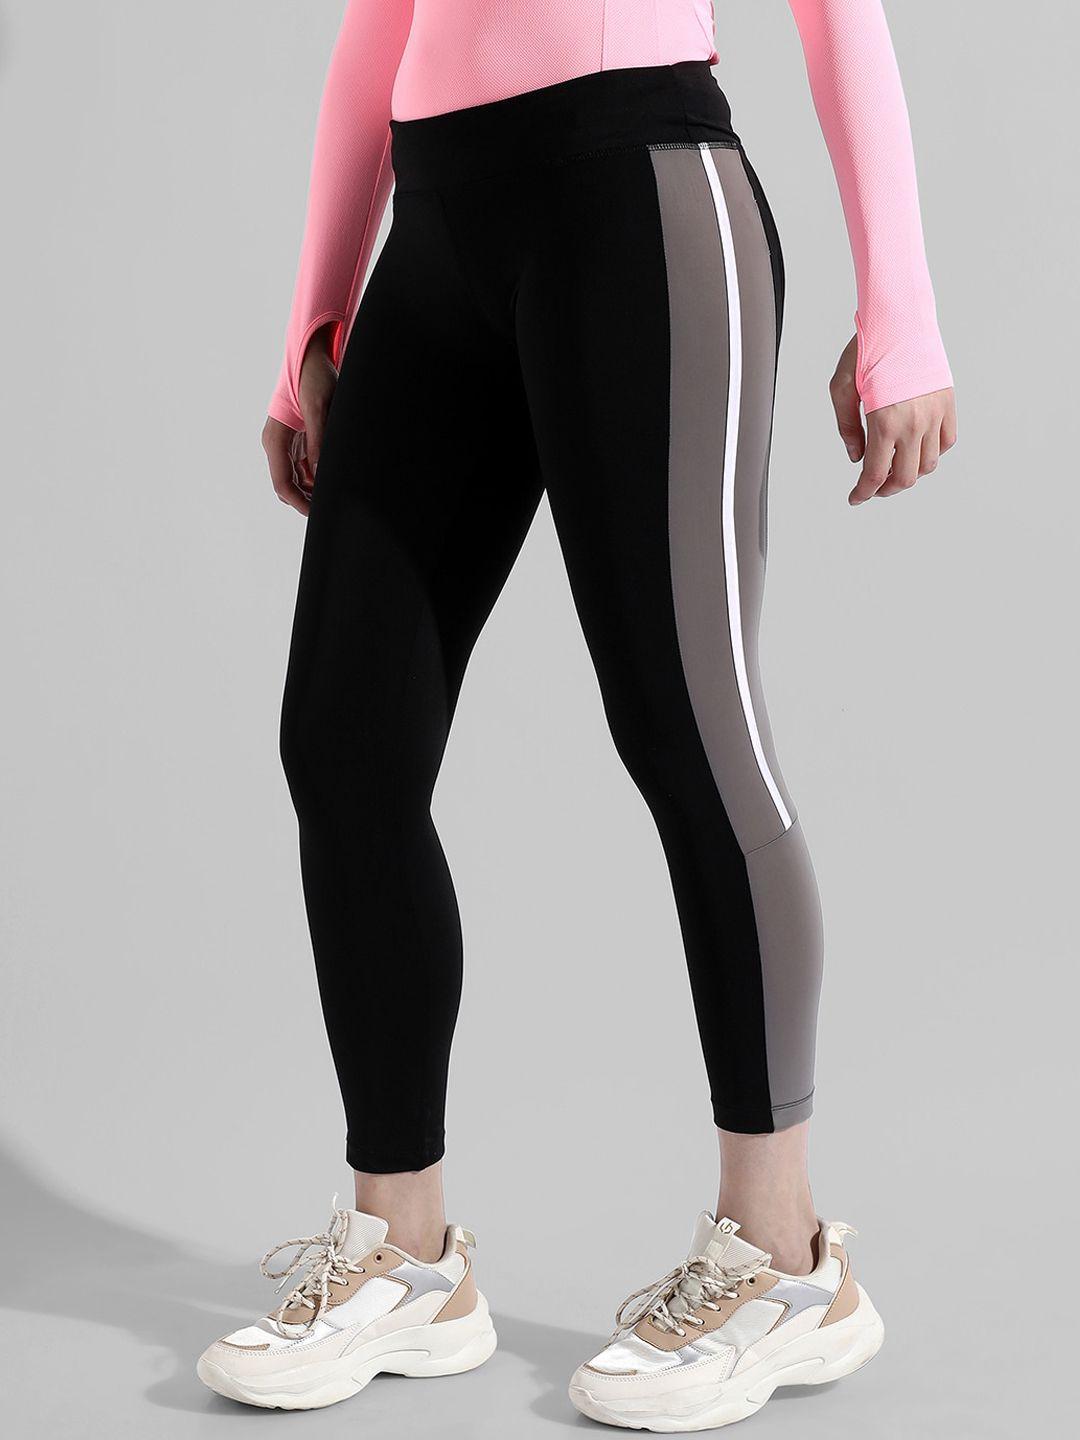 campus sutra women side-striped running tights